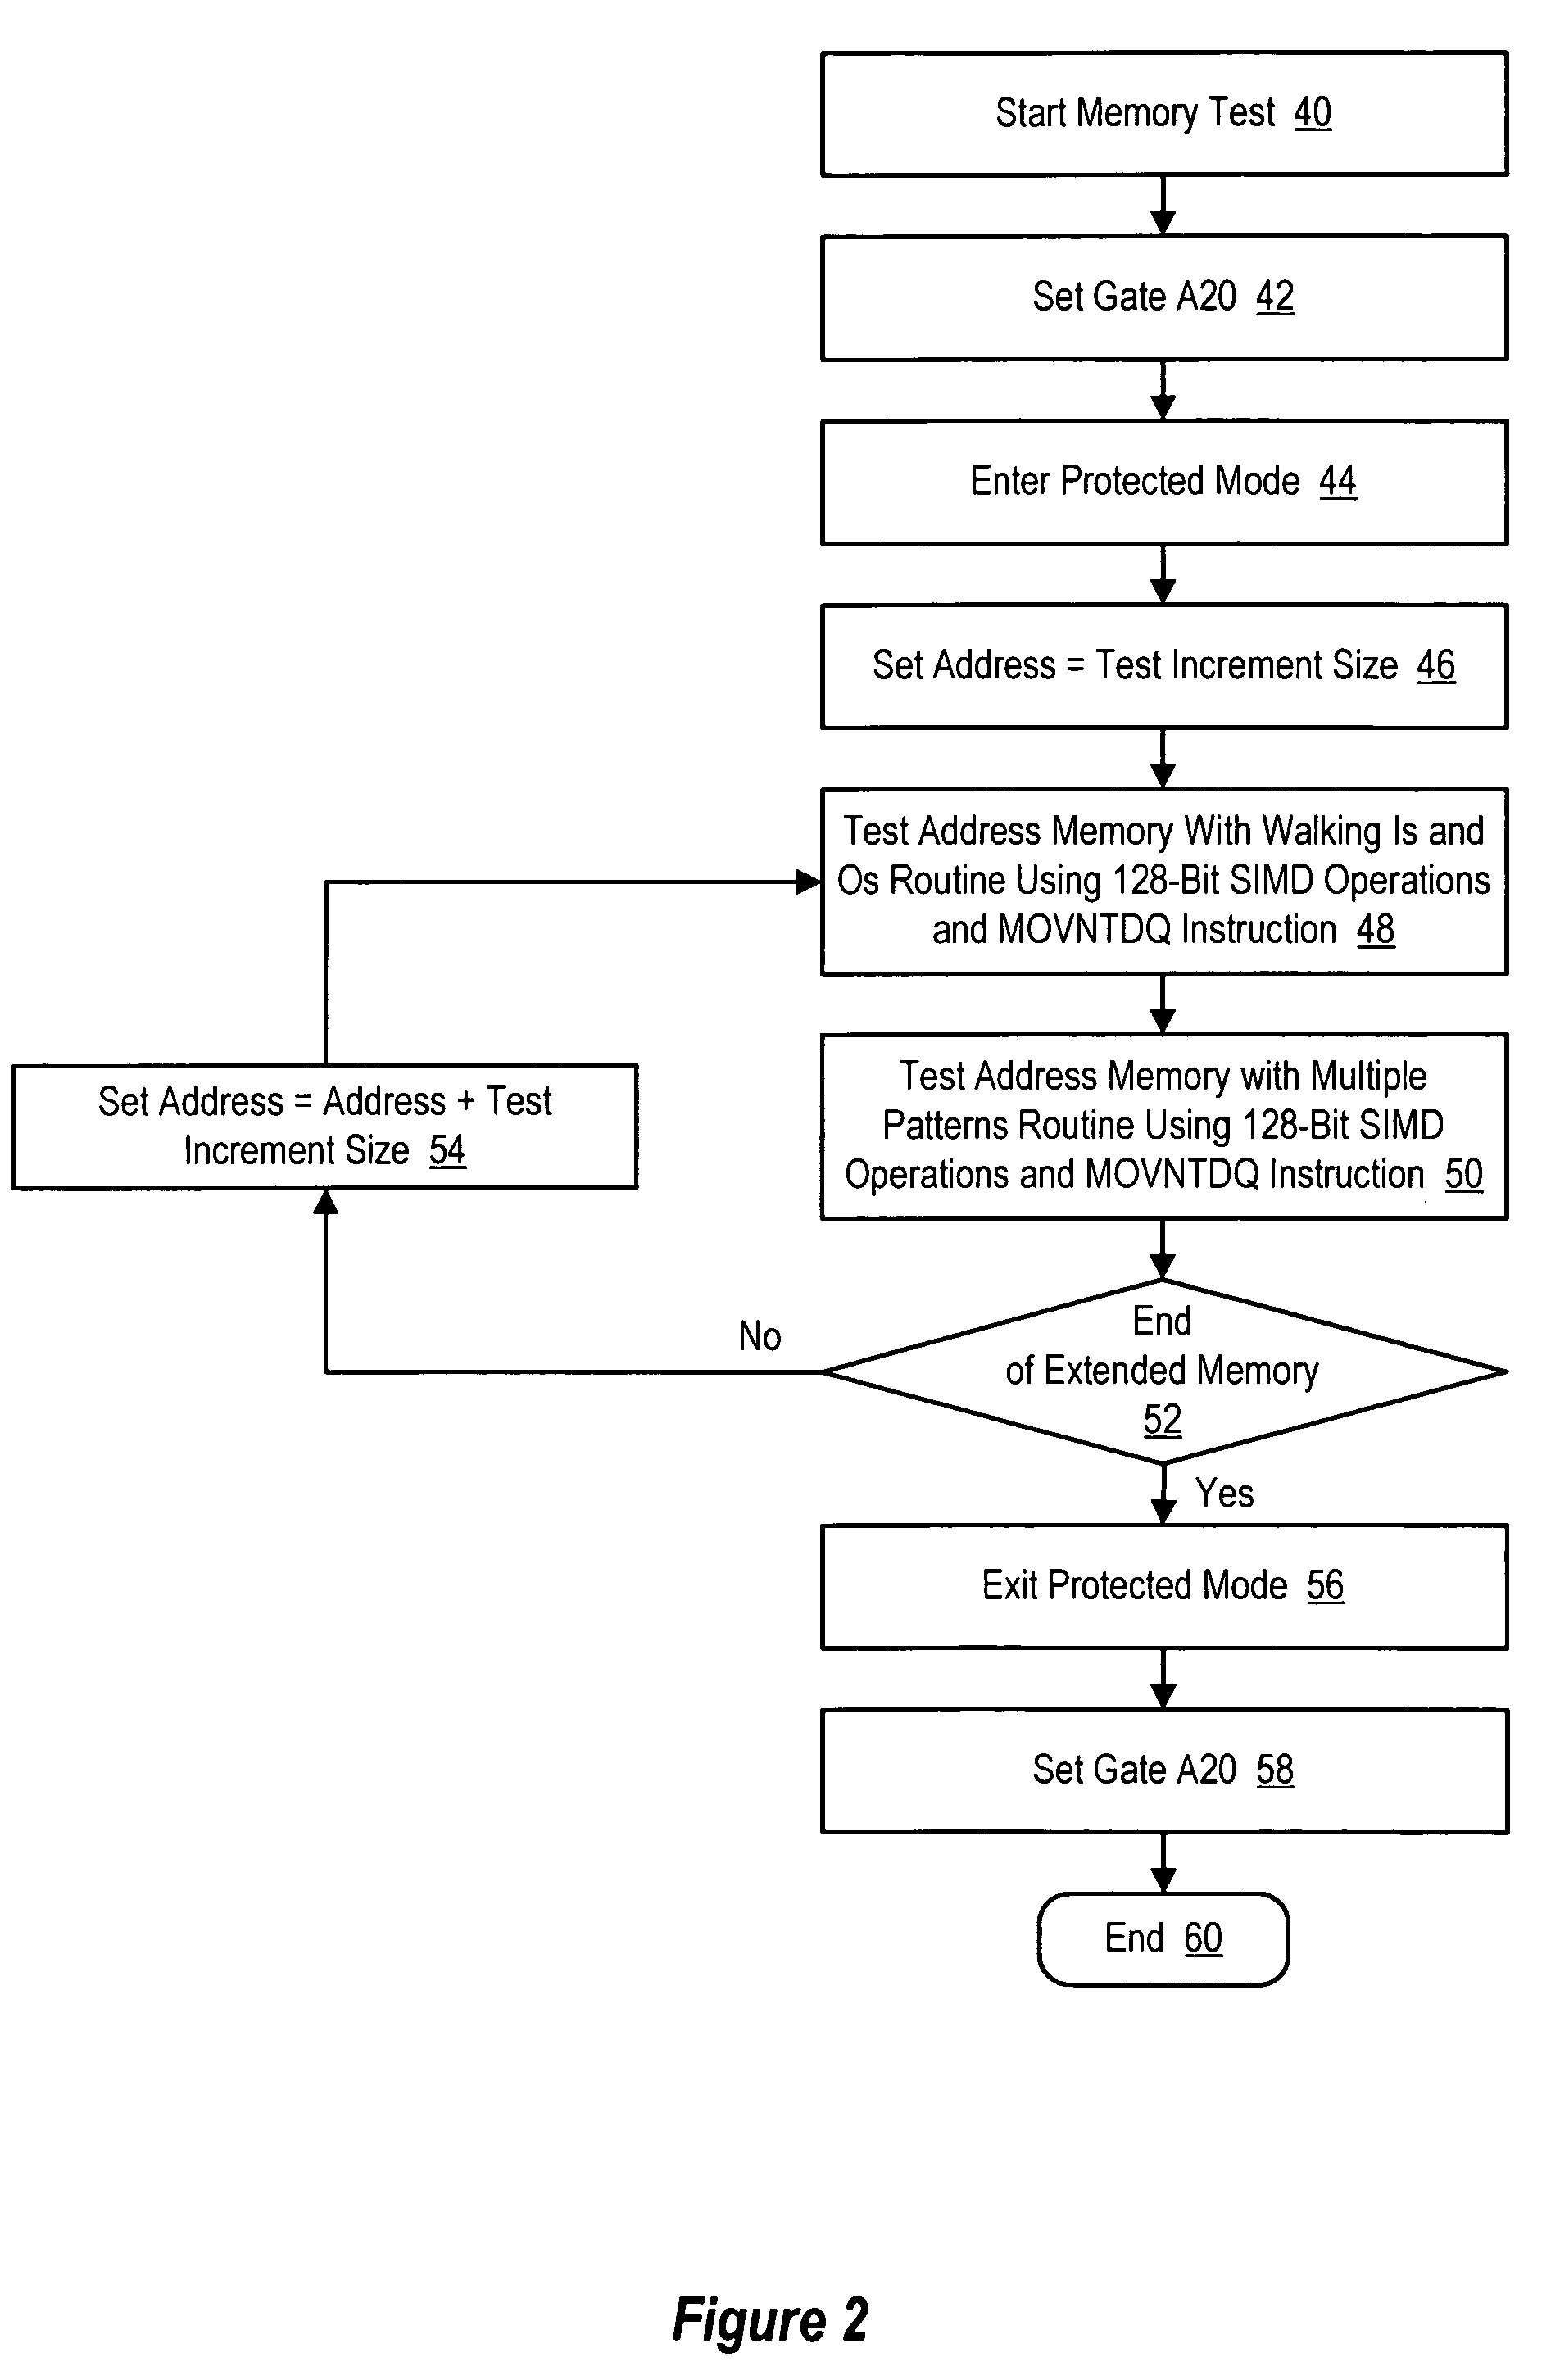 System and method for accelerated information handling system memory testing